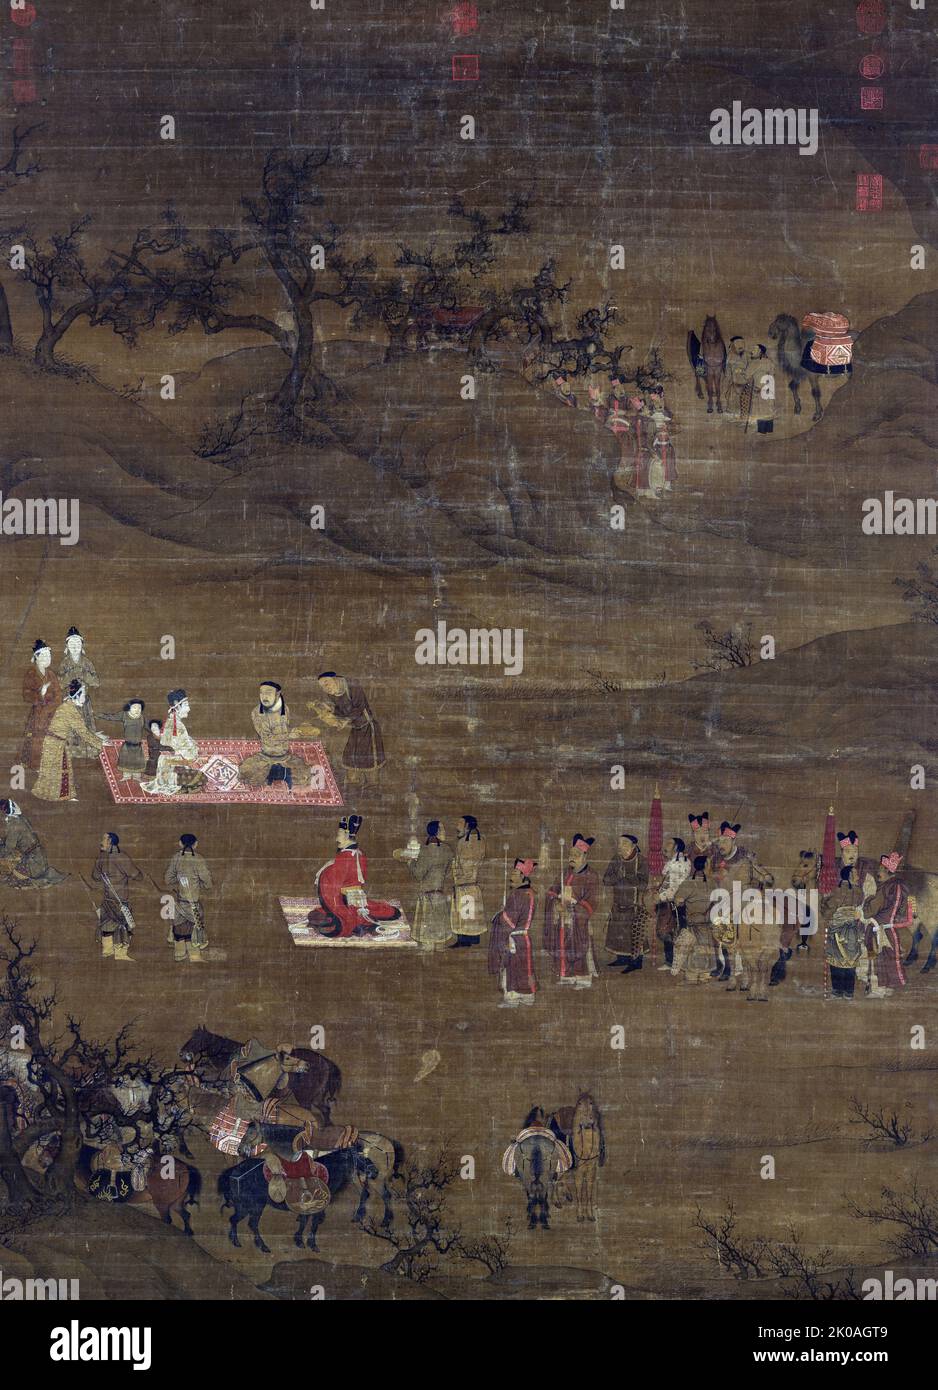 Chen Juzhong (1195-1224) Lady Wenji's Return to China. Cai Wenji (162-229), daughter of Cai Yong from the Eastern Han period, was abducted by northern tribesmen on horseback during the chaos of the Xingping era, married to King Zuoxian of the Southern Xiongnu, and later rescued by Cao Cao after payment of a large ransom. This painting had been attributed to Chen Juzhong during the Jiatai reign (1201-1204) of Emperor Ningzong of the Song dynasty. Stock Photo